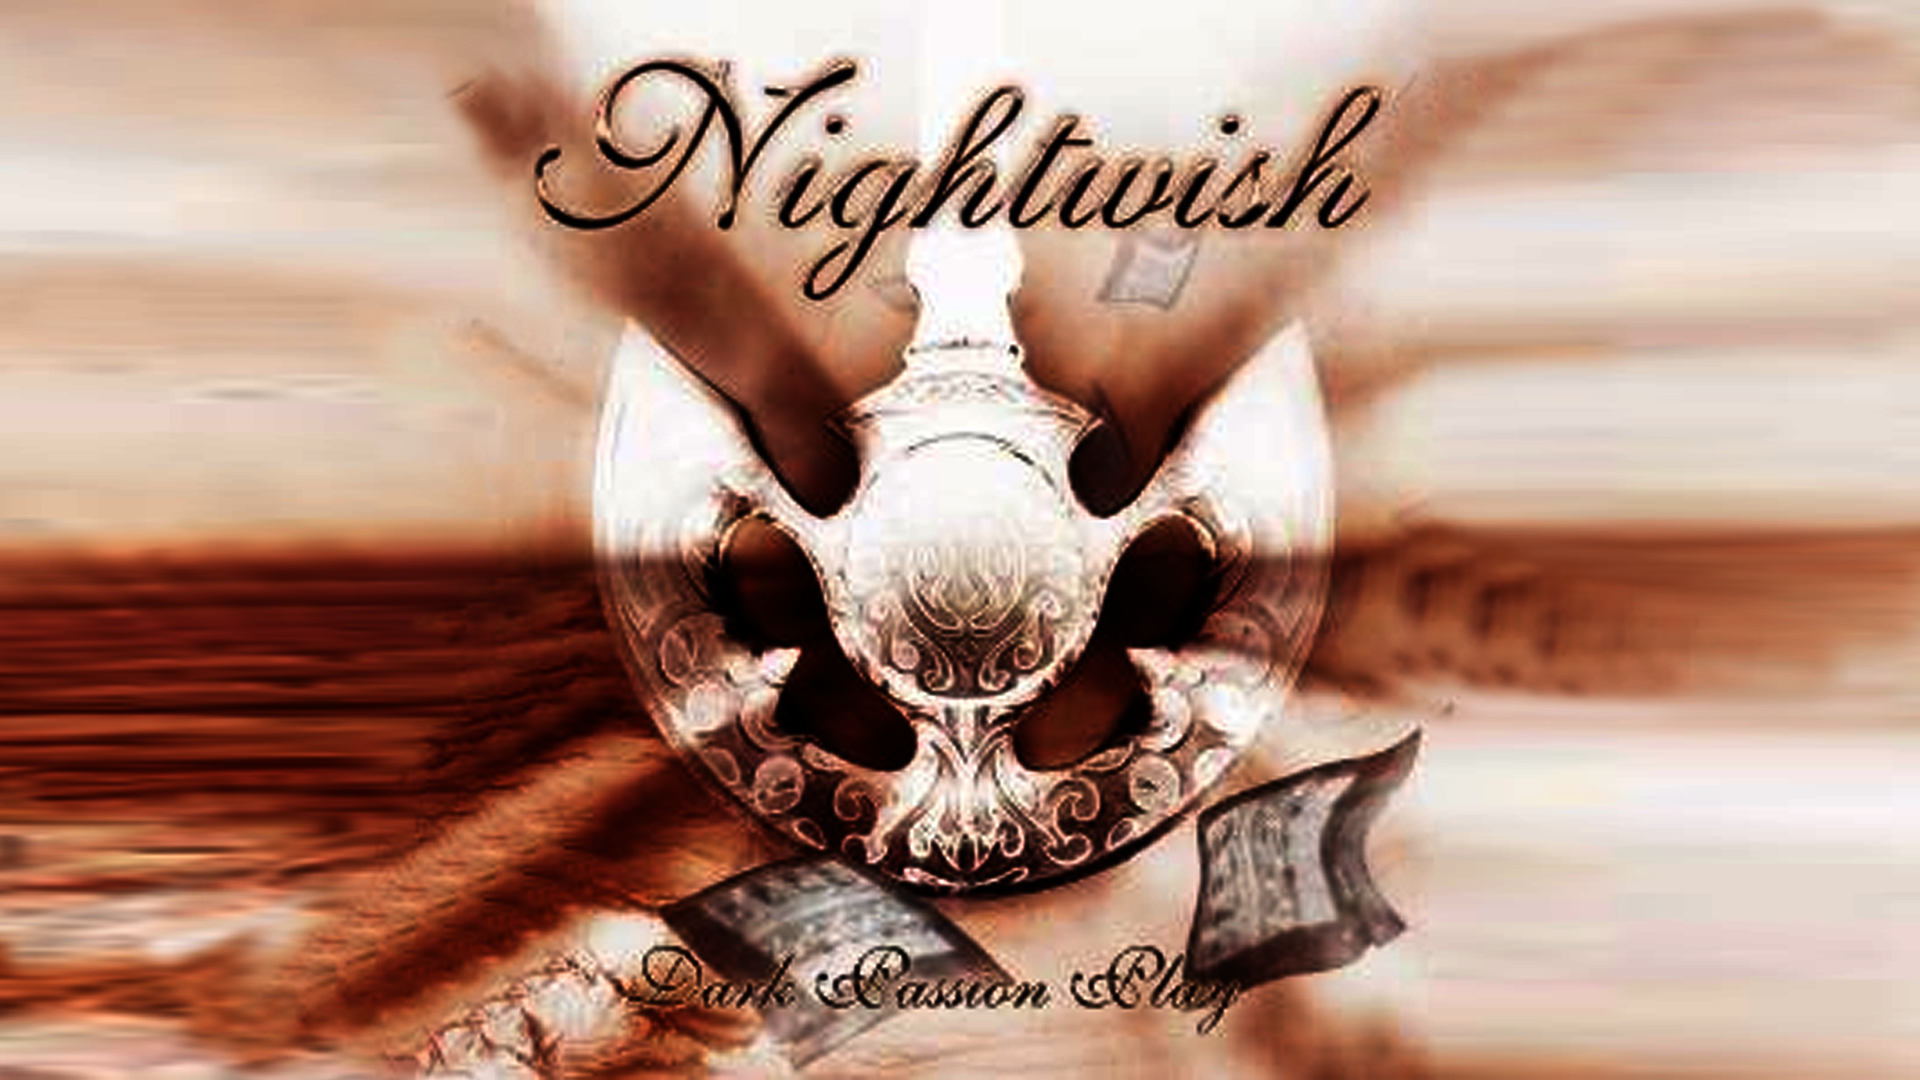 Nightwish Background 1 by mbowe-wallpapers on DeviantArt